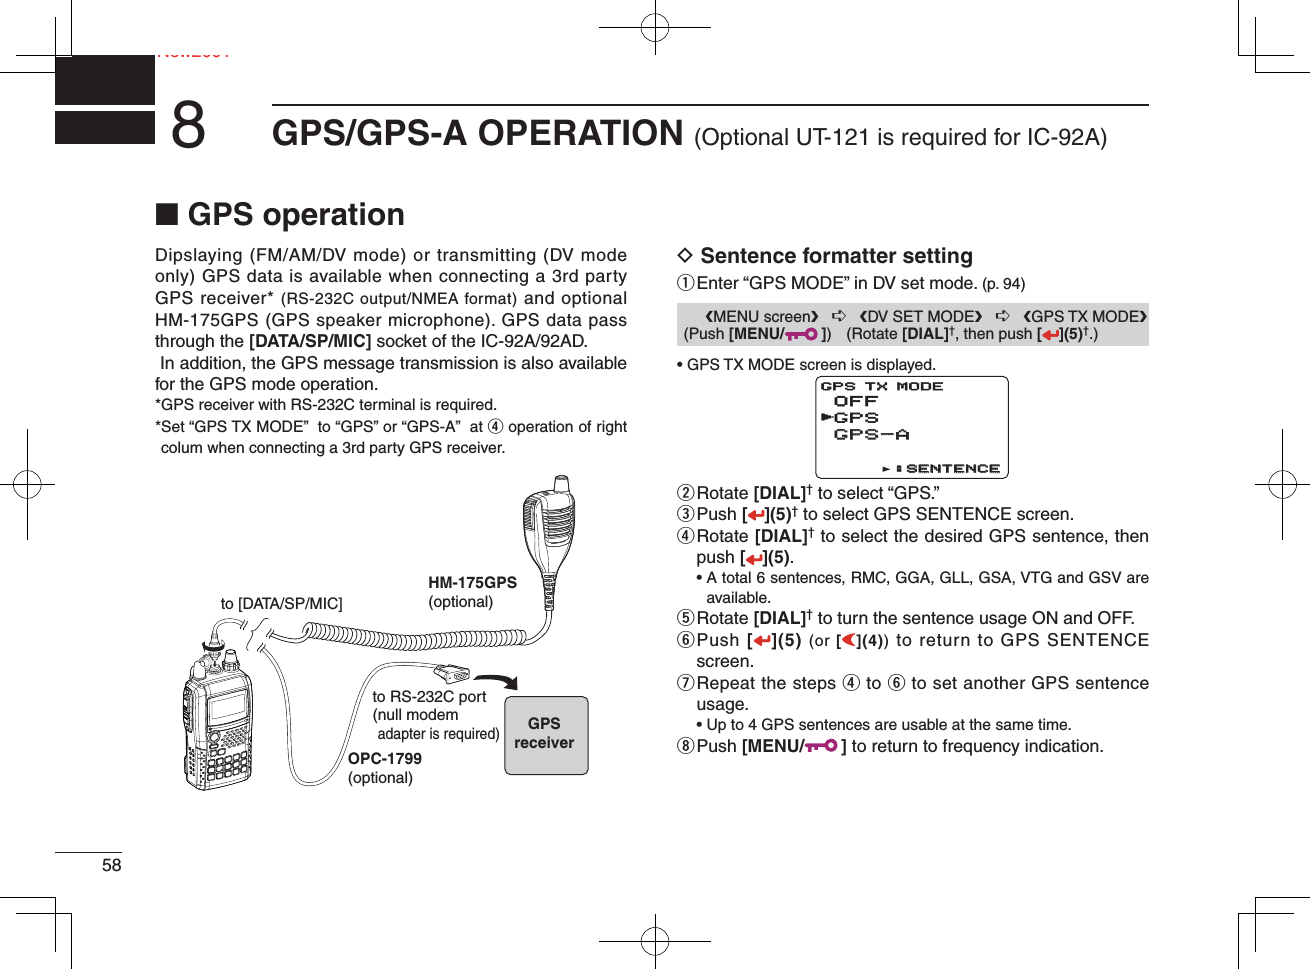 58New2001GPS/GPS-A OPERATION (Optional UT-121 is required for IC-92A)8Ne■ GPS operationDipslaying (FM/AM/DV mode) or transmitting (DV mode only) GPS data is available when connecting a 3rd party GPS receiver* (RS-232C output/NMEA format) and optional HM-175GPS (GPS speaker microphone). GPS data pass through the [DATA/SP/MIC] socket of the IC-92A/92AD. In addition, the GPS message transmission is also available for the GPS mode operation.*GPS receiver with RS-232C terminal is required.* Set “GPS TX MODE”  to “GPS” or “GPS-A”  at r operation of right colum when connecting a 3rd party GPS receiver.D Sentence formatter settingq Enter “GPS MODE” in DV set mode. (p. 94) • GPS TX MODE screen is displayed.w Rotate  [DIAL]† to select “GPS.”e Push  [](5)† to select GPS SENTENCE screen.r  Rotate [DIAL]† to select the desired GPS sentence, then push [](5). •  A total 6 sentences, RMC, GGA, GLL, GSA, VTG and GSV are available.t Rotate  [DIAL]† to turn the sentence usage ON and OFF.y  Push [](5) (or [](4)) to return to GPS SENTENCE screen.u  Repeat the steps r to y to set another GPS sentence usage.  • Up to 4 GPS sentences are usable at the same time.i Push  [MENU/ ] to return to frequency indication.OPC-1799(optional)HM-175GPS(optional)to [DATA/SP/MIC]to RS-232C port(null modemadapter is required)GPSreceiver      ❮MENU screen❯   ➪   ❮DV SET MODE❯   ➪   ❮GPS TX MODE❯ (Push [MENU/ ]) (Rotate [DIAL]†, then push [ ](5)†.)OFFGPSGPS-AGPS-AGPS TX MODE:SENTENCE:SENTENCEr